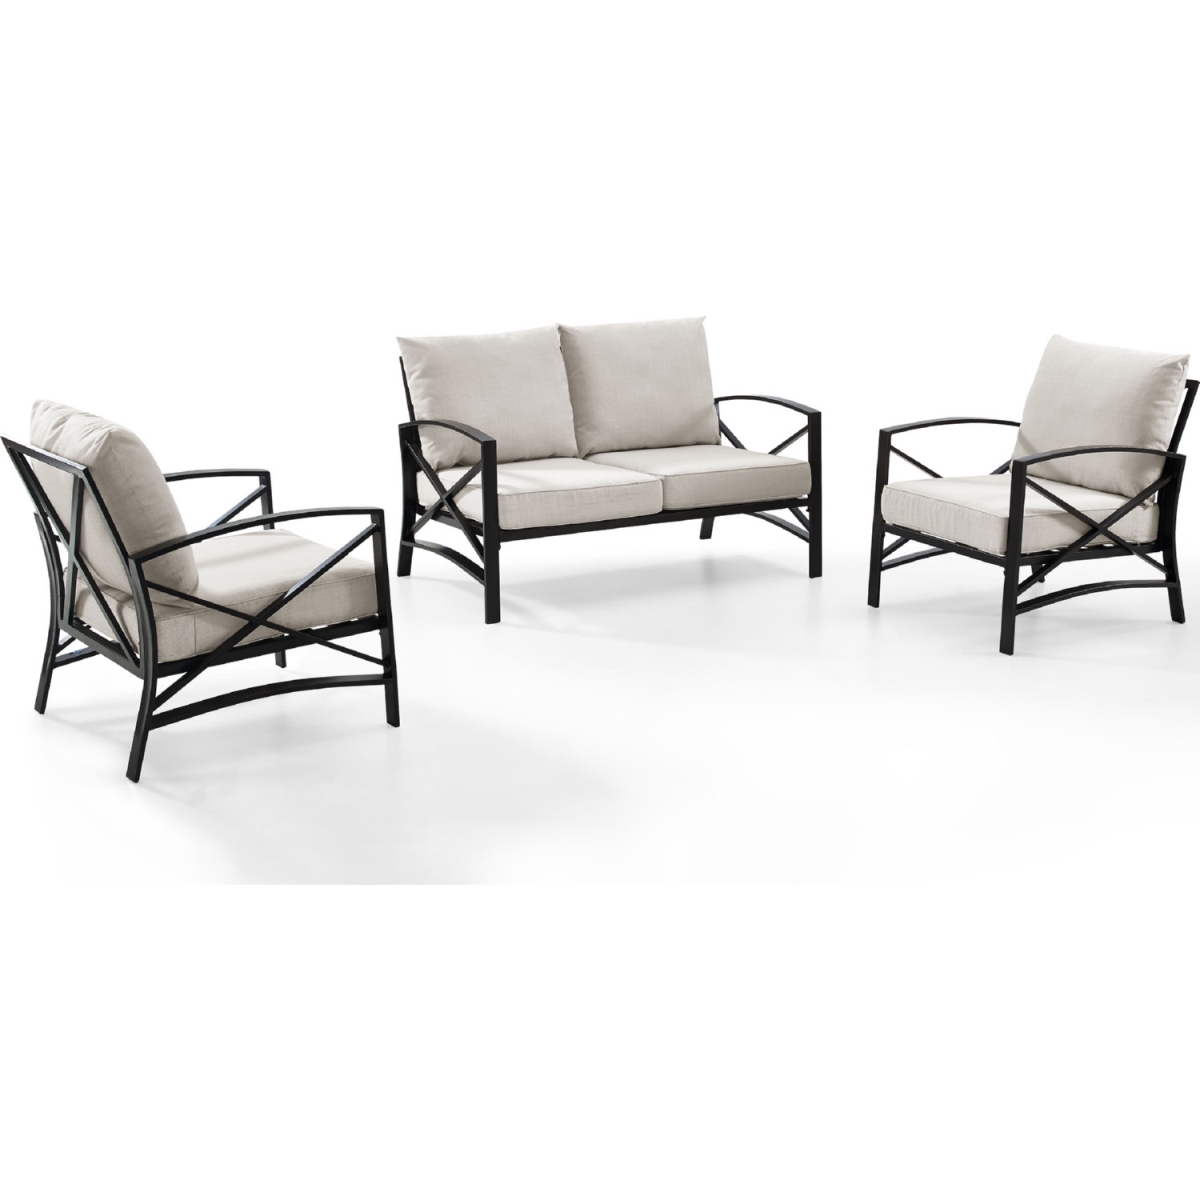 3 Piece Kaplan Outdoor Seating Set With Oatmeal Cushion - Loveseat, Two Kaplan Outdoor Chairs